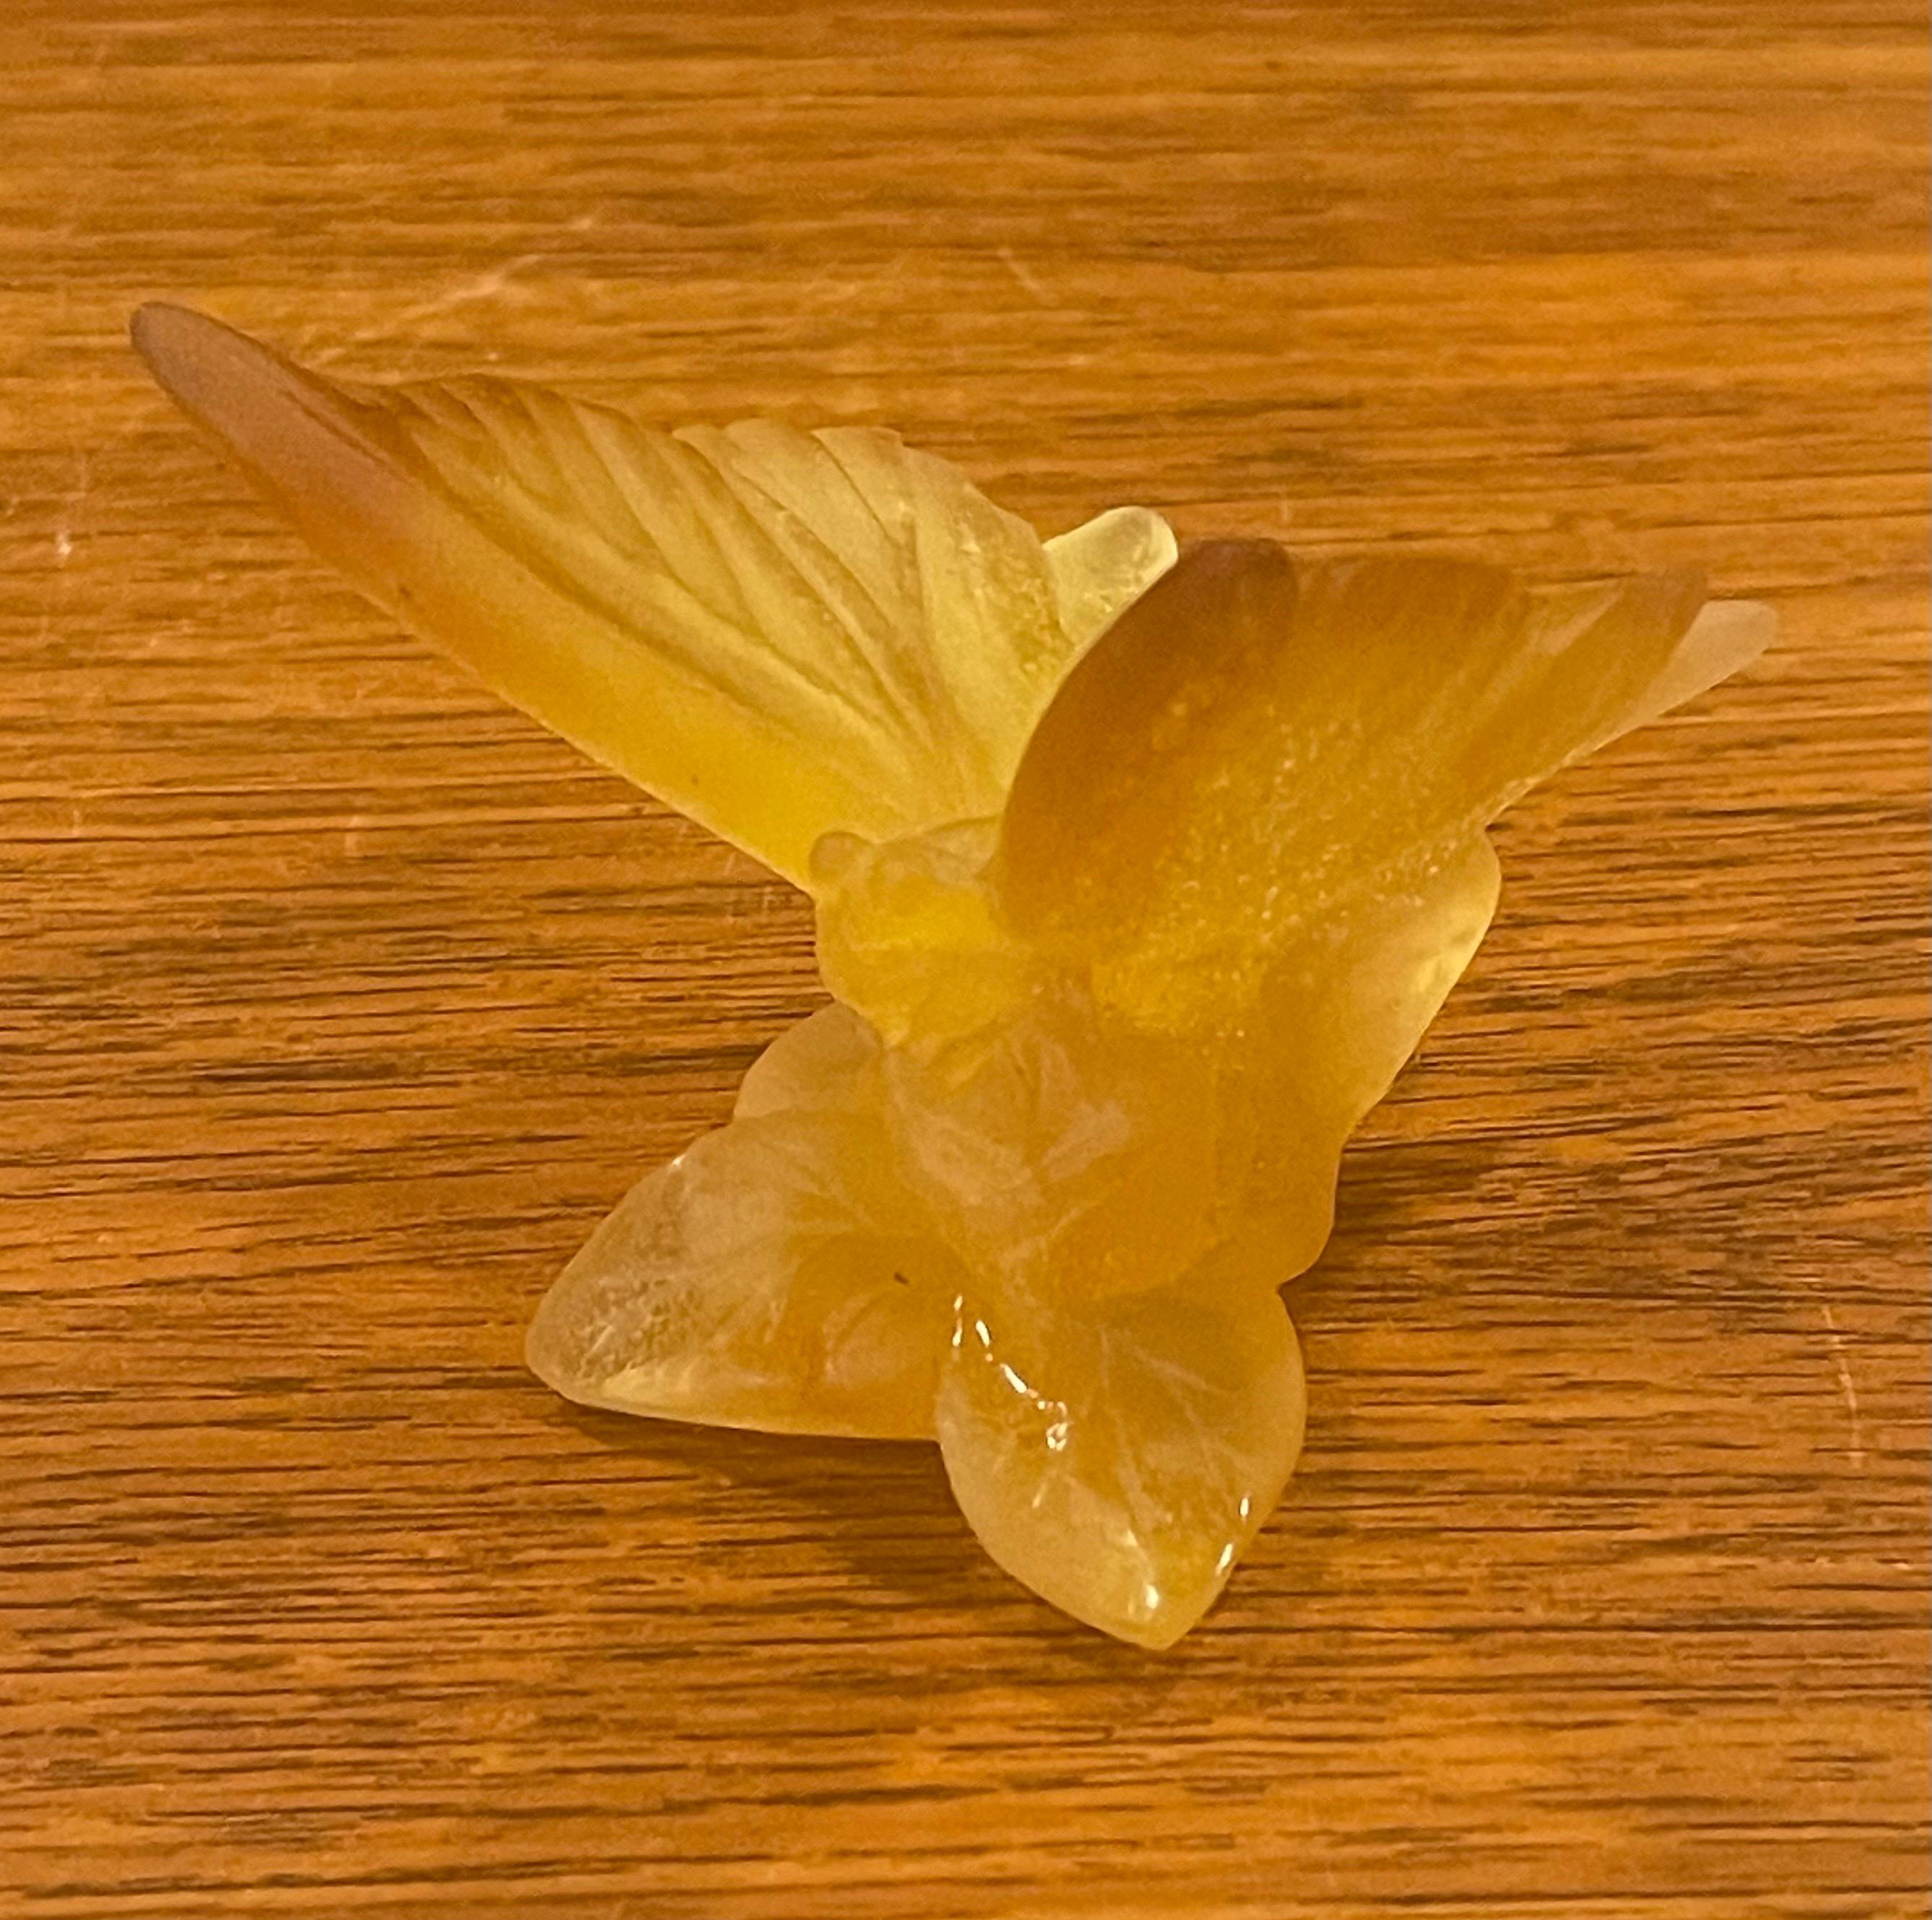 20th Century Small Crystal Butterfly Sculpture / Paperweight by Daum, France